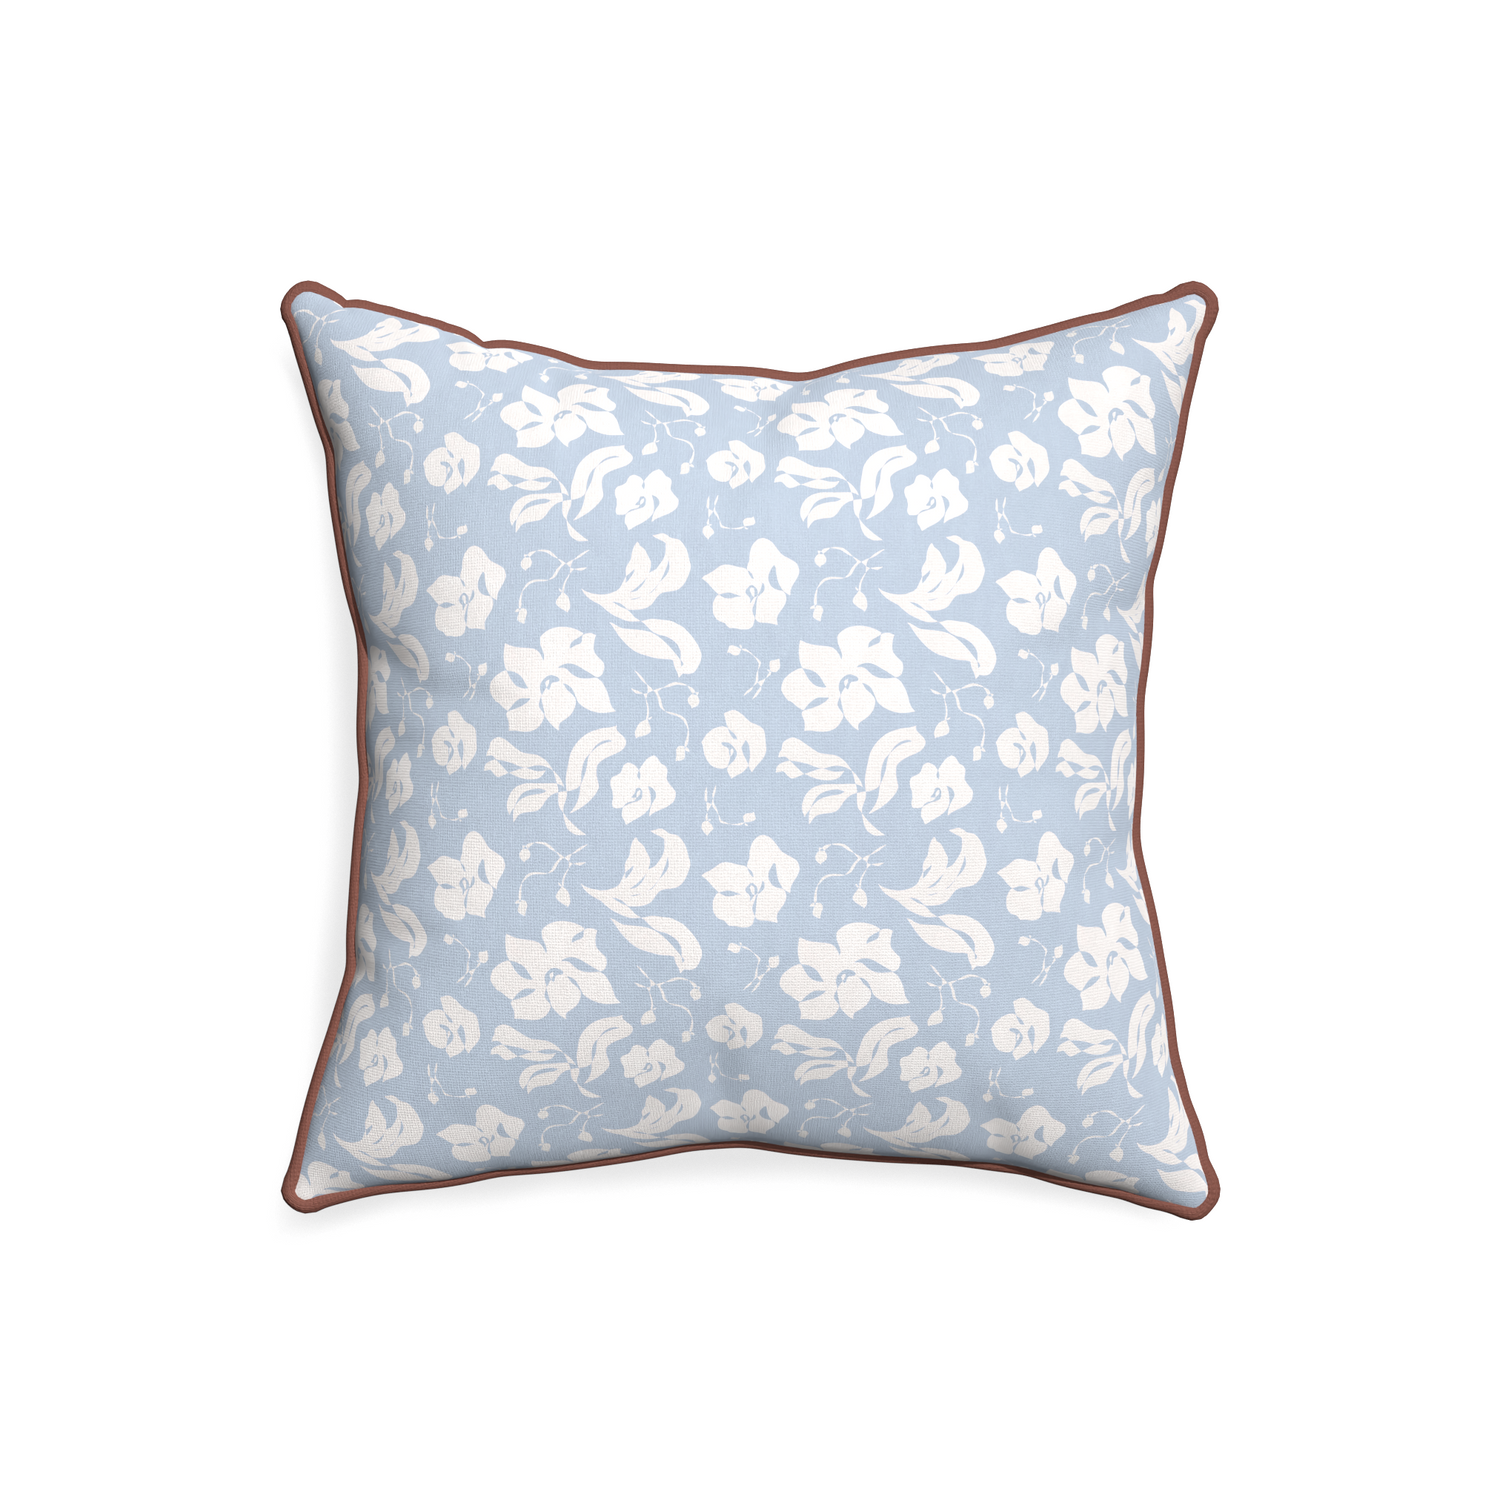 20-square georgia custom pillow with w piping on white background